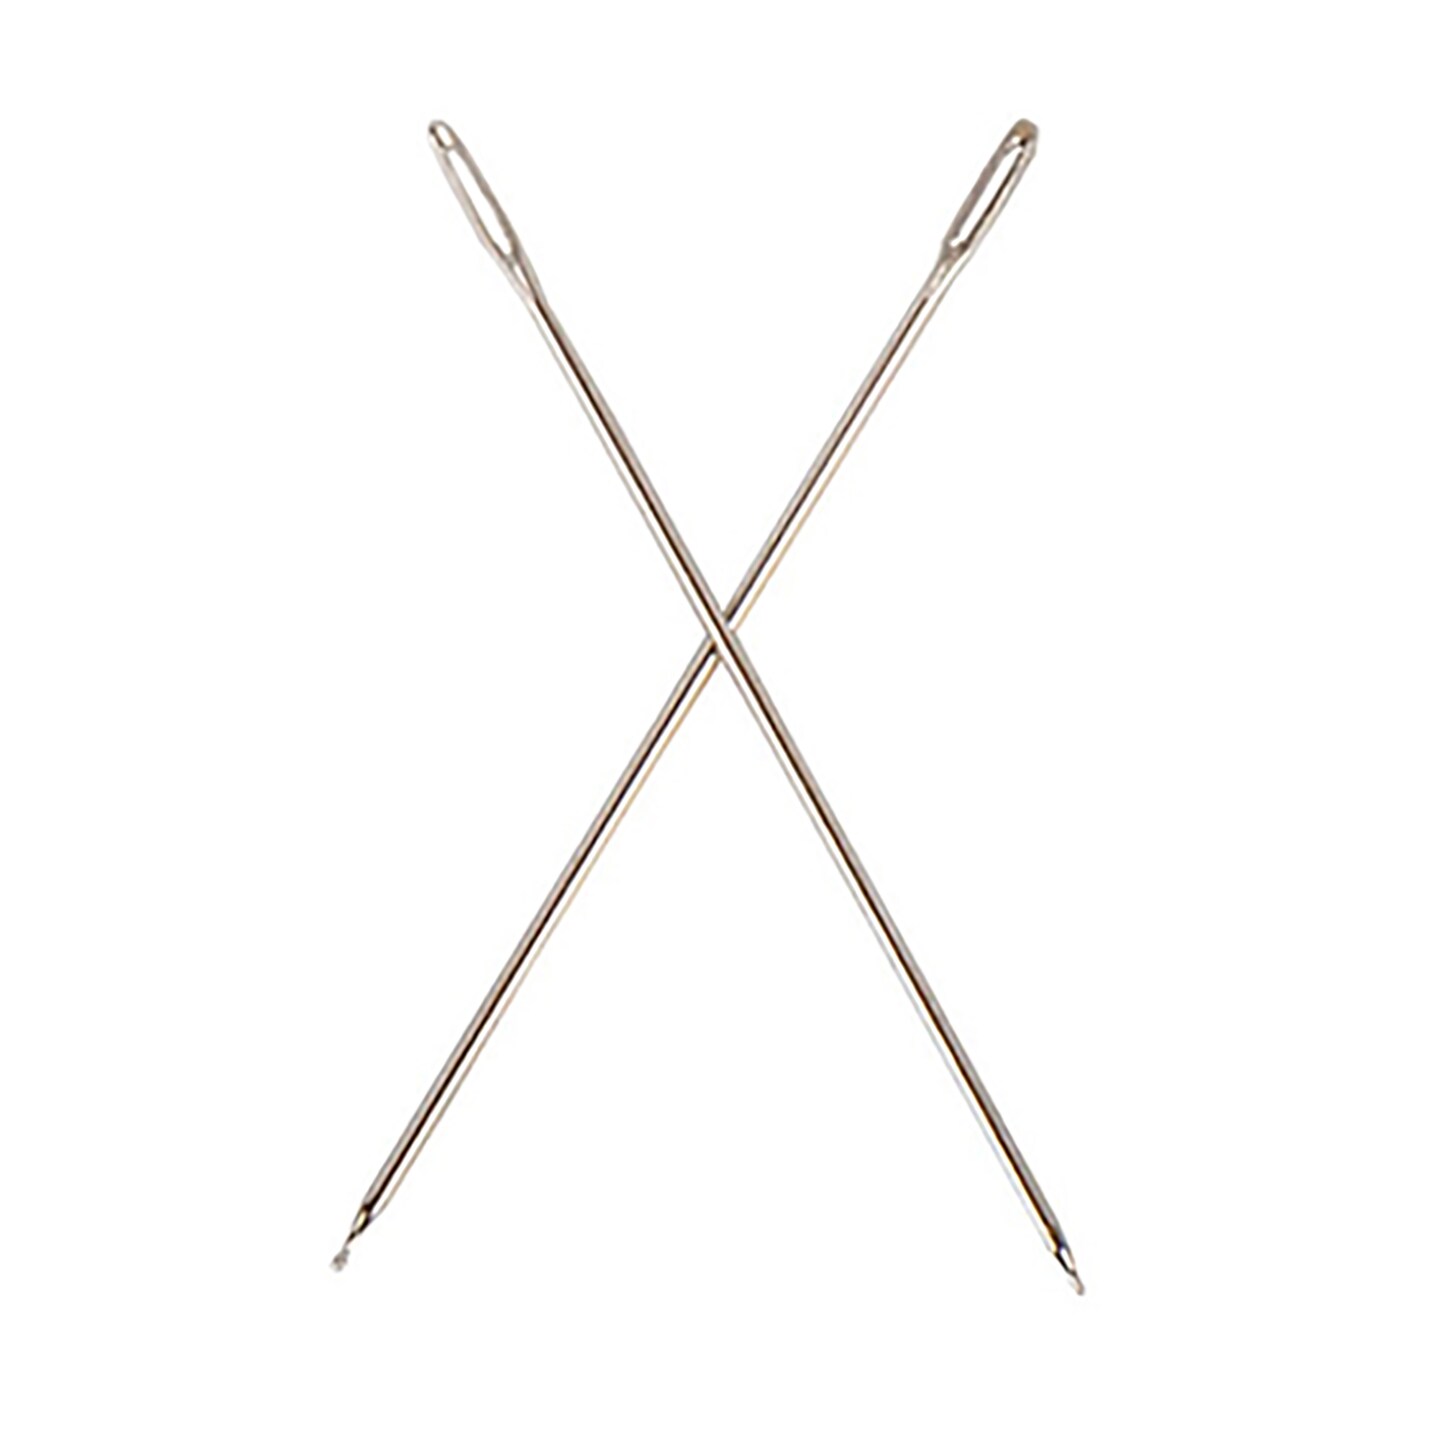 Easy Guide Ball-Tip Needles for Cross Stitch - Stitched Modern